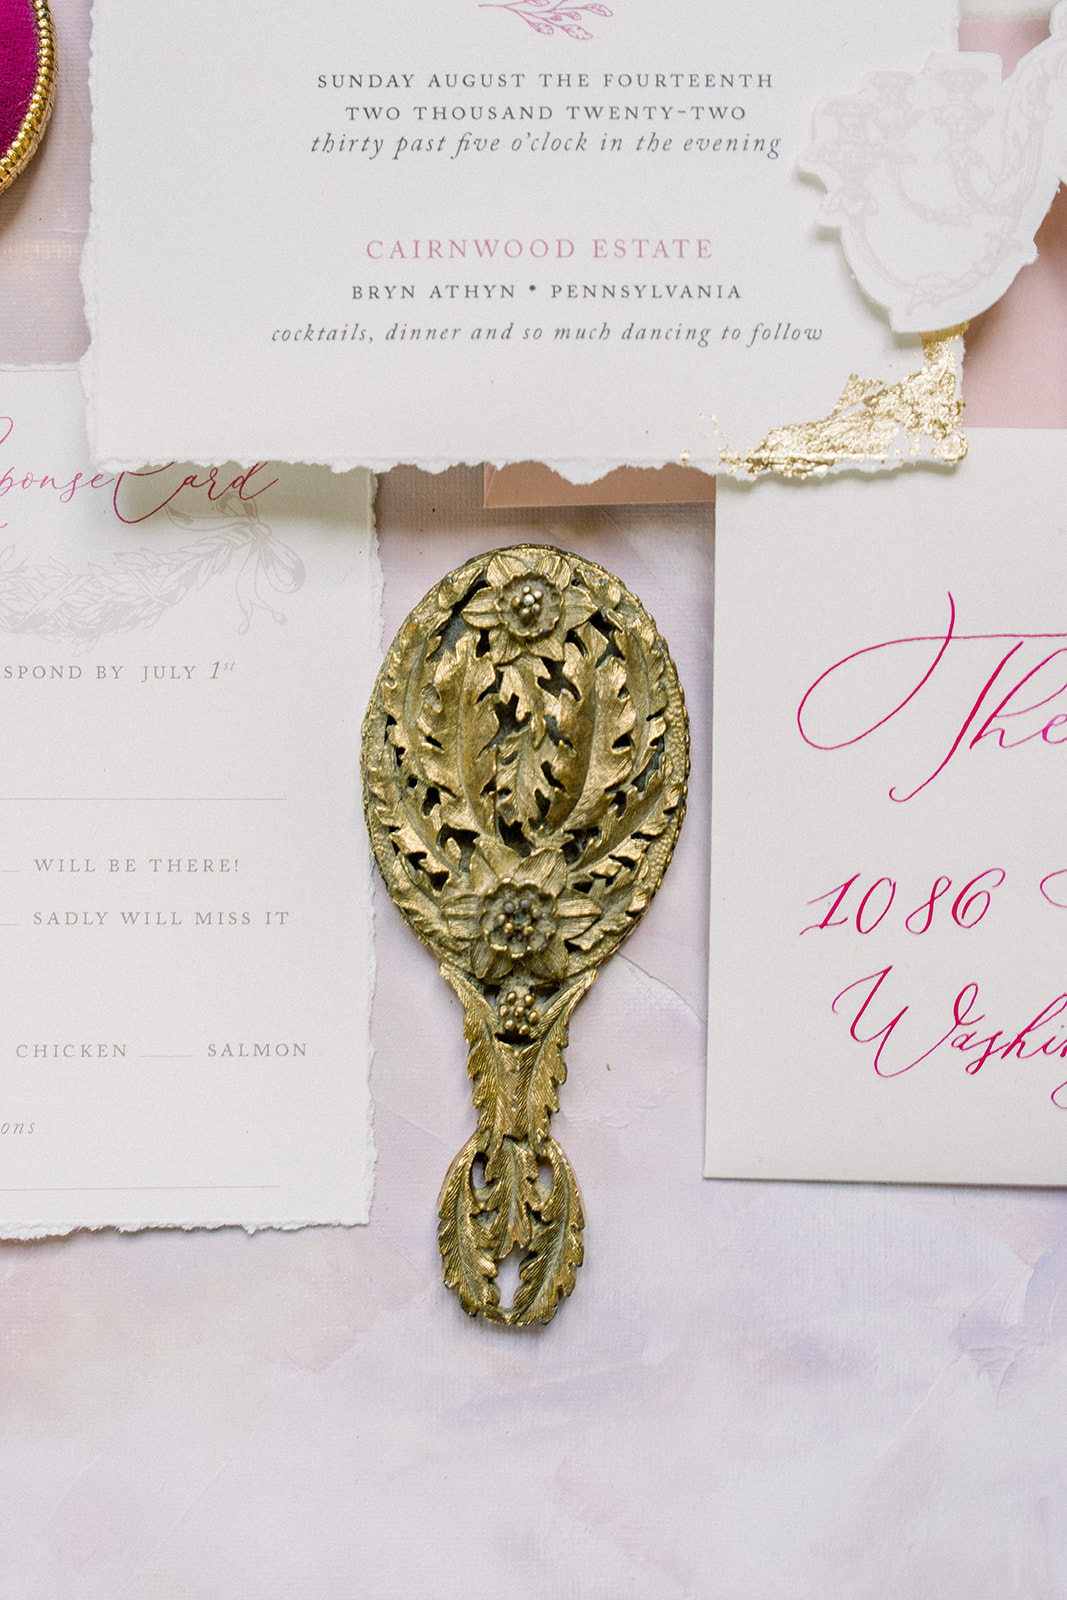 Elegant wedding invitation suite on blush fabric with gold vintage mirror and florals, by Elephant Limbo.